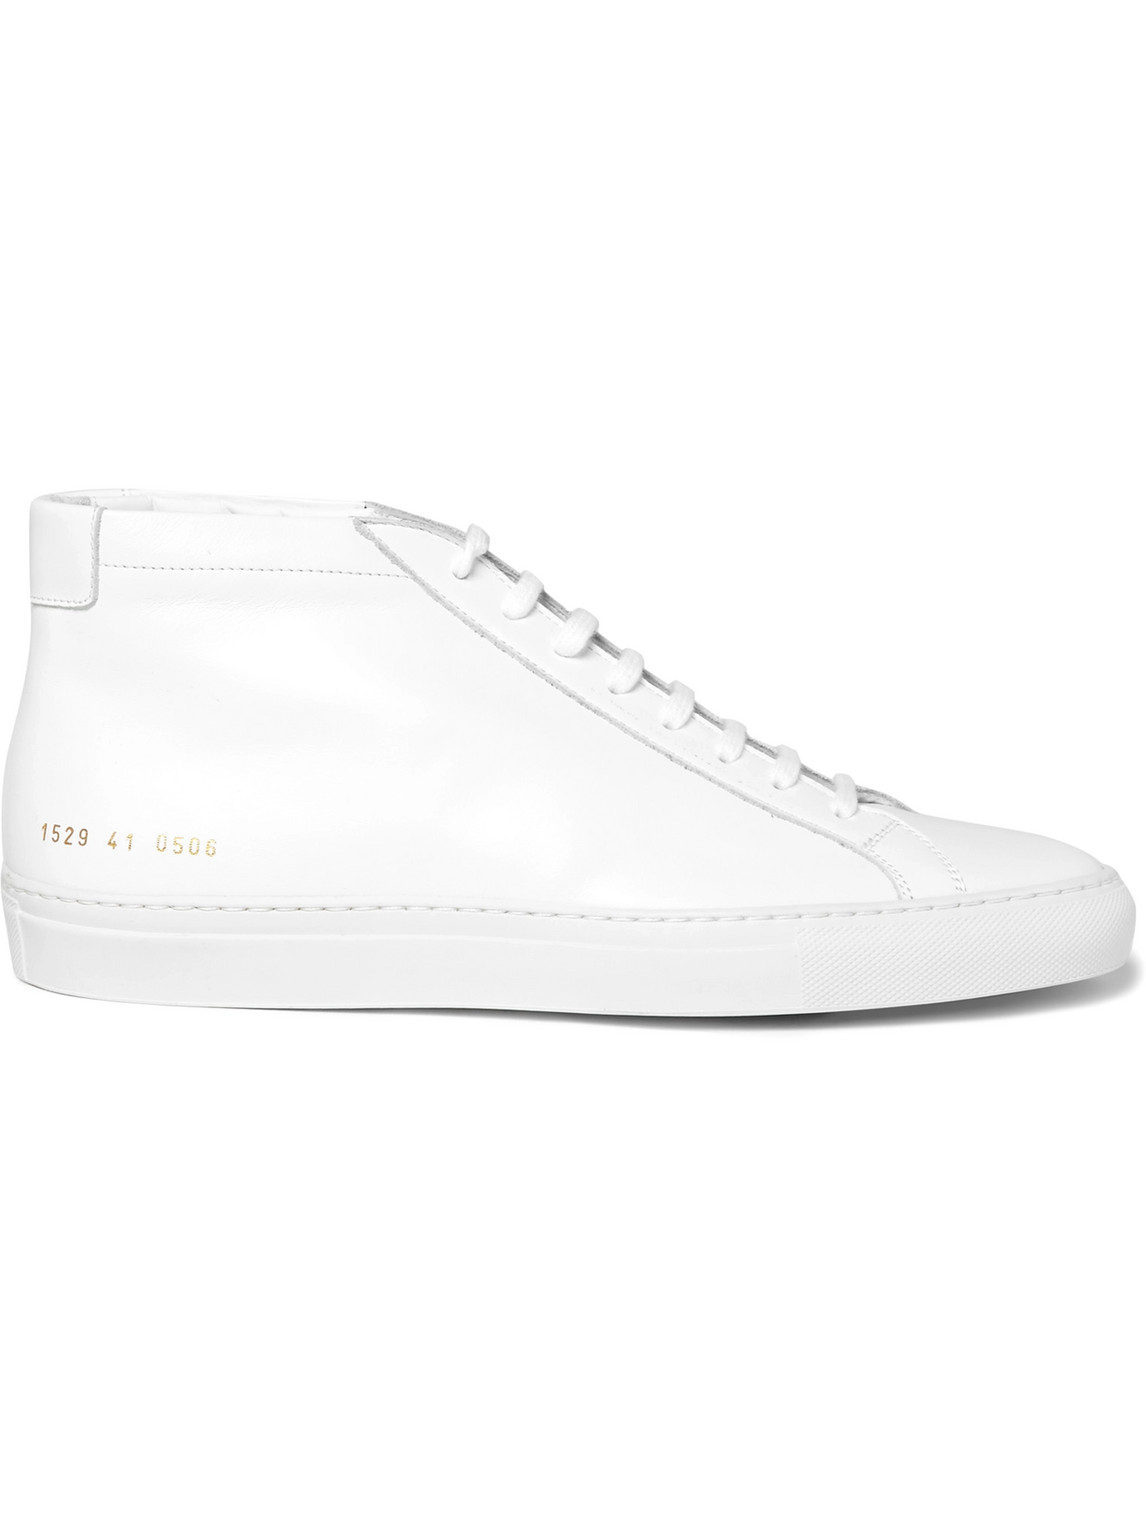 COMMON PROJECTS ORIGINAL ACHILLES LEATHER HIGH-TOP SNEAKERS